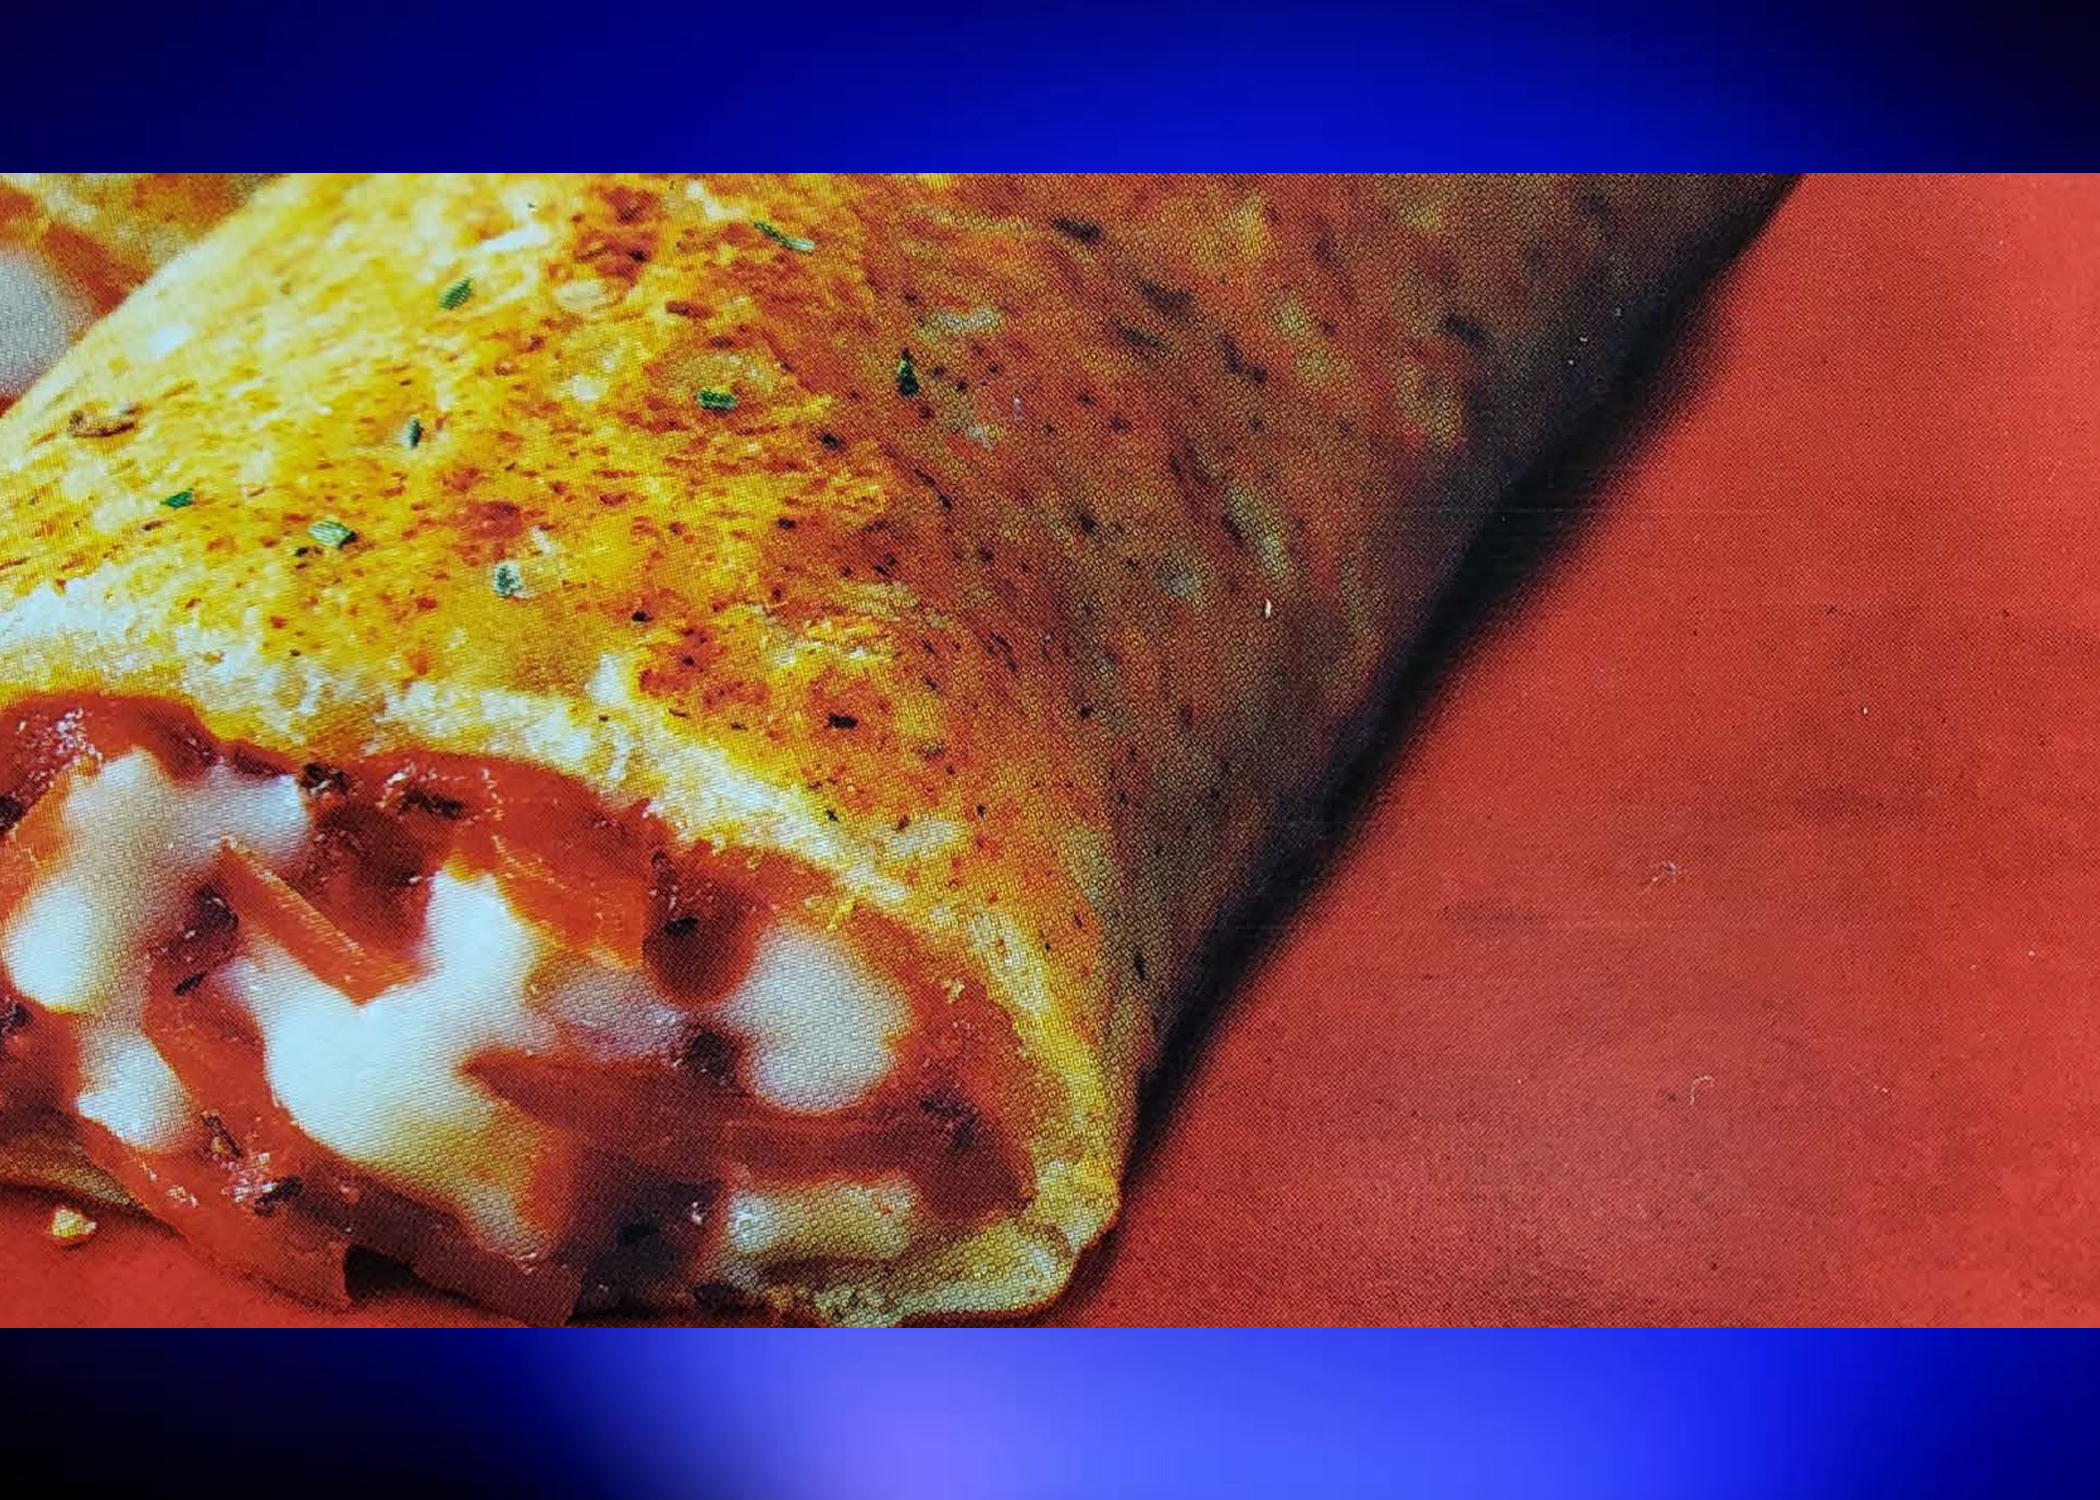 RECALL ALERT: Nestle Not-Ready-to-Eat Pepperoni Hot Pockets Product